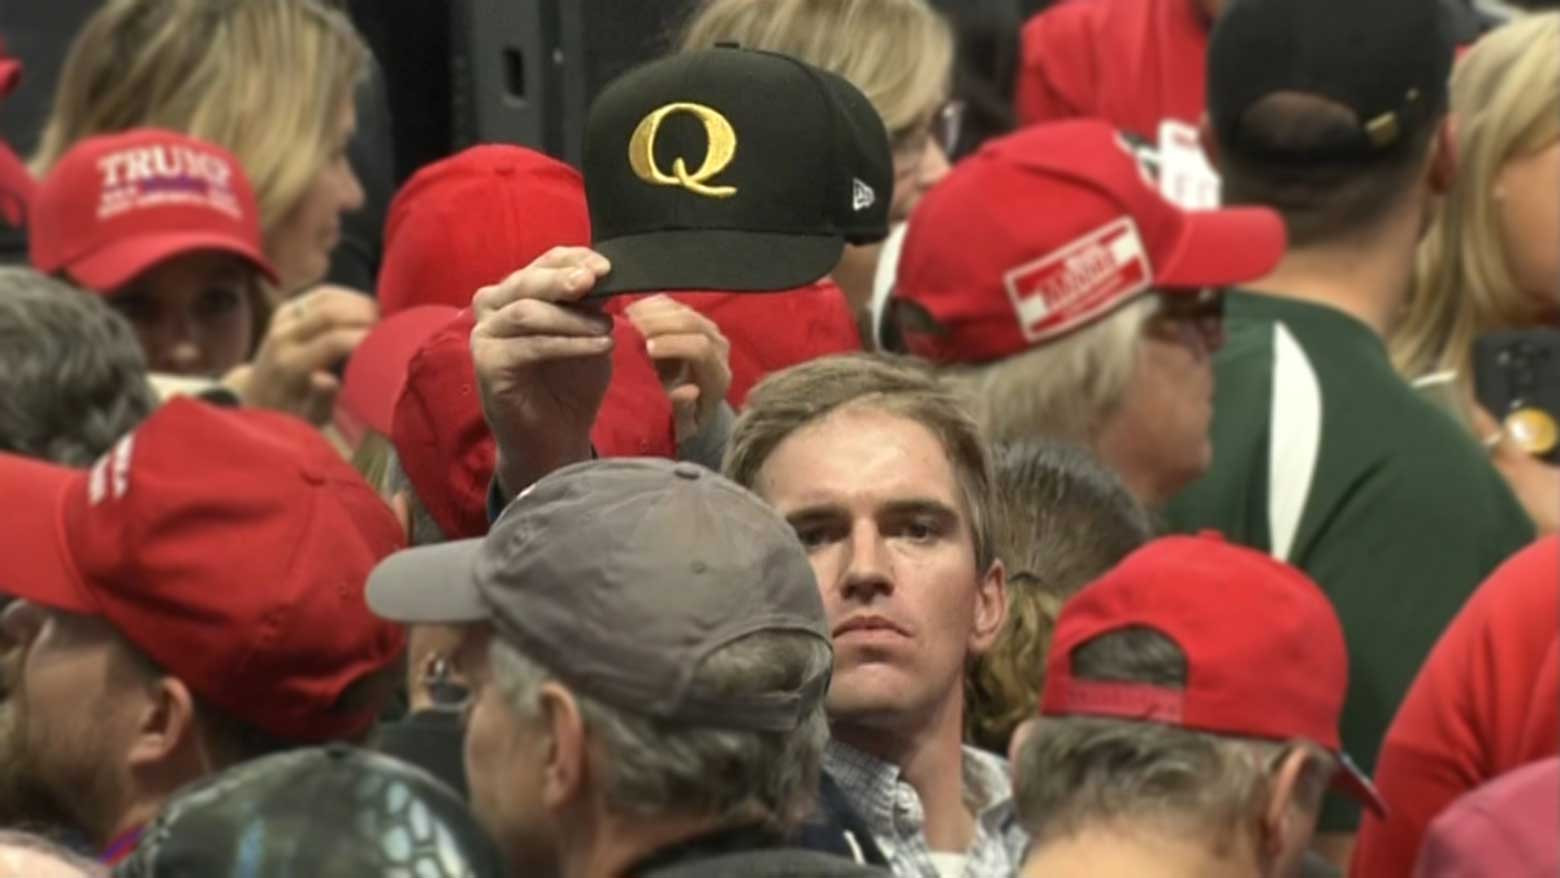 "QAnon" conspiracy theory takes hold in the United States